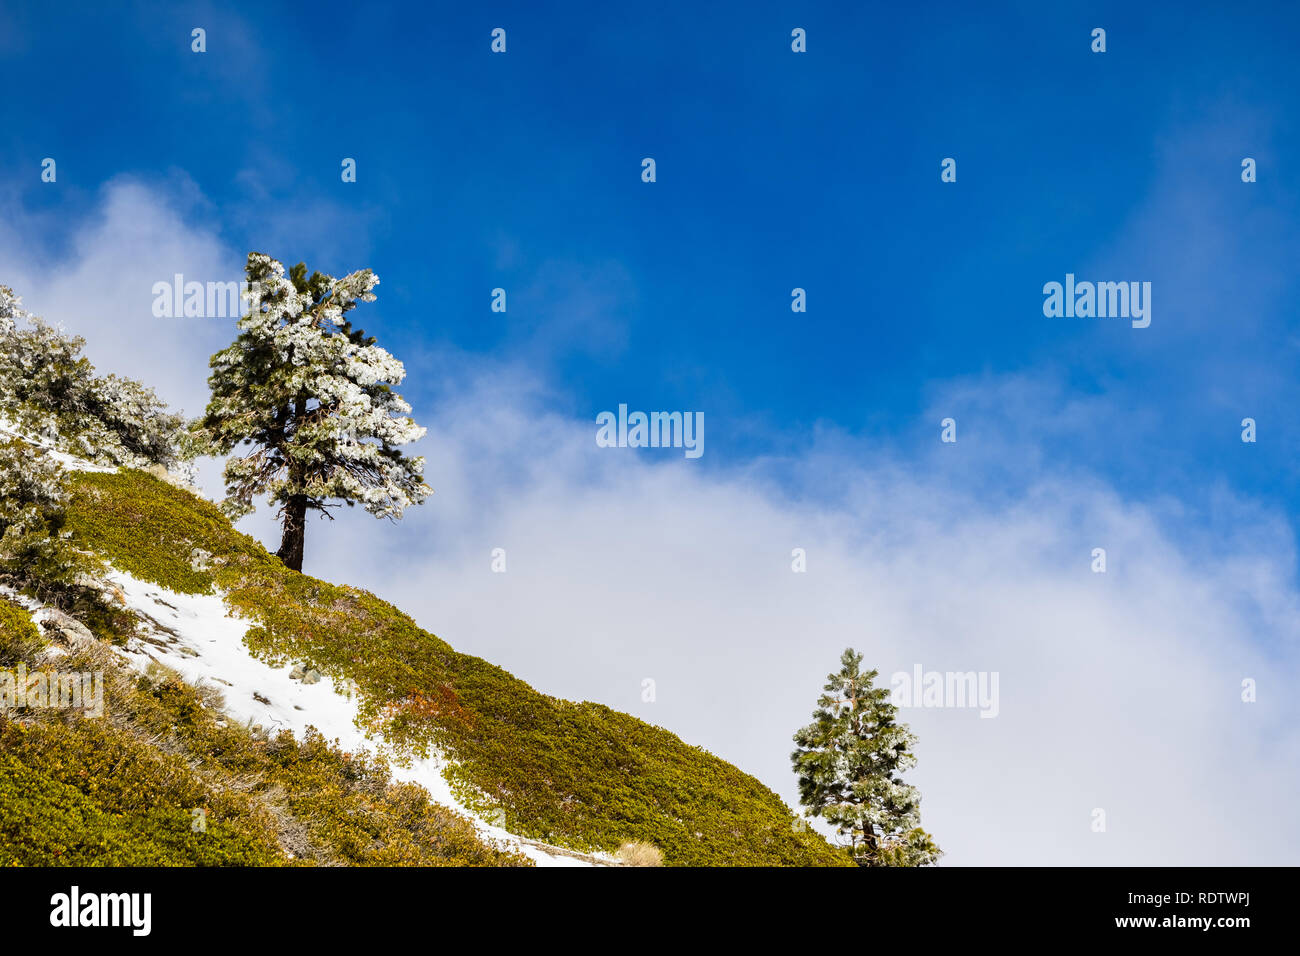 Pine tree covered in frost high on the mountain; fog rising up from the valley, Mount San Antonio (Mt Baldy), Los Angeles county, California Stock Photo